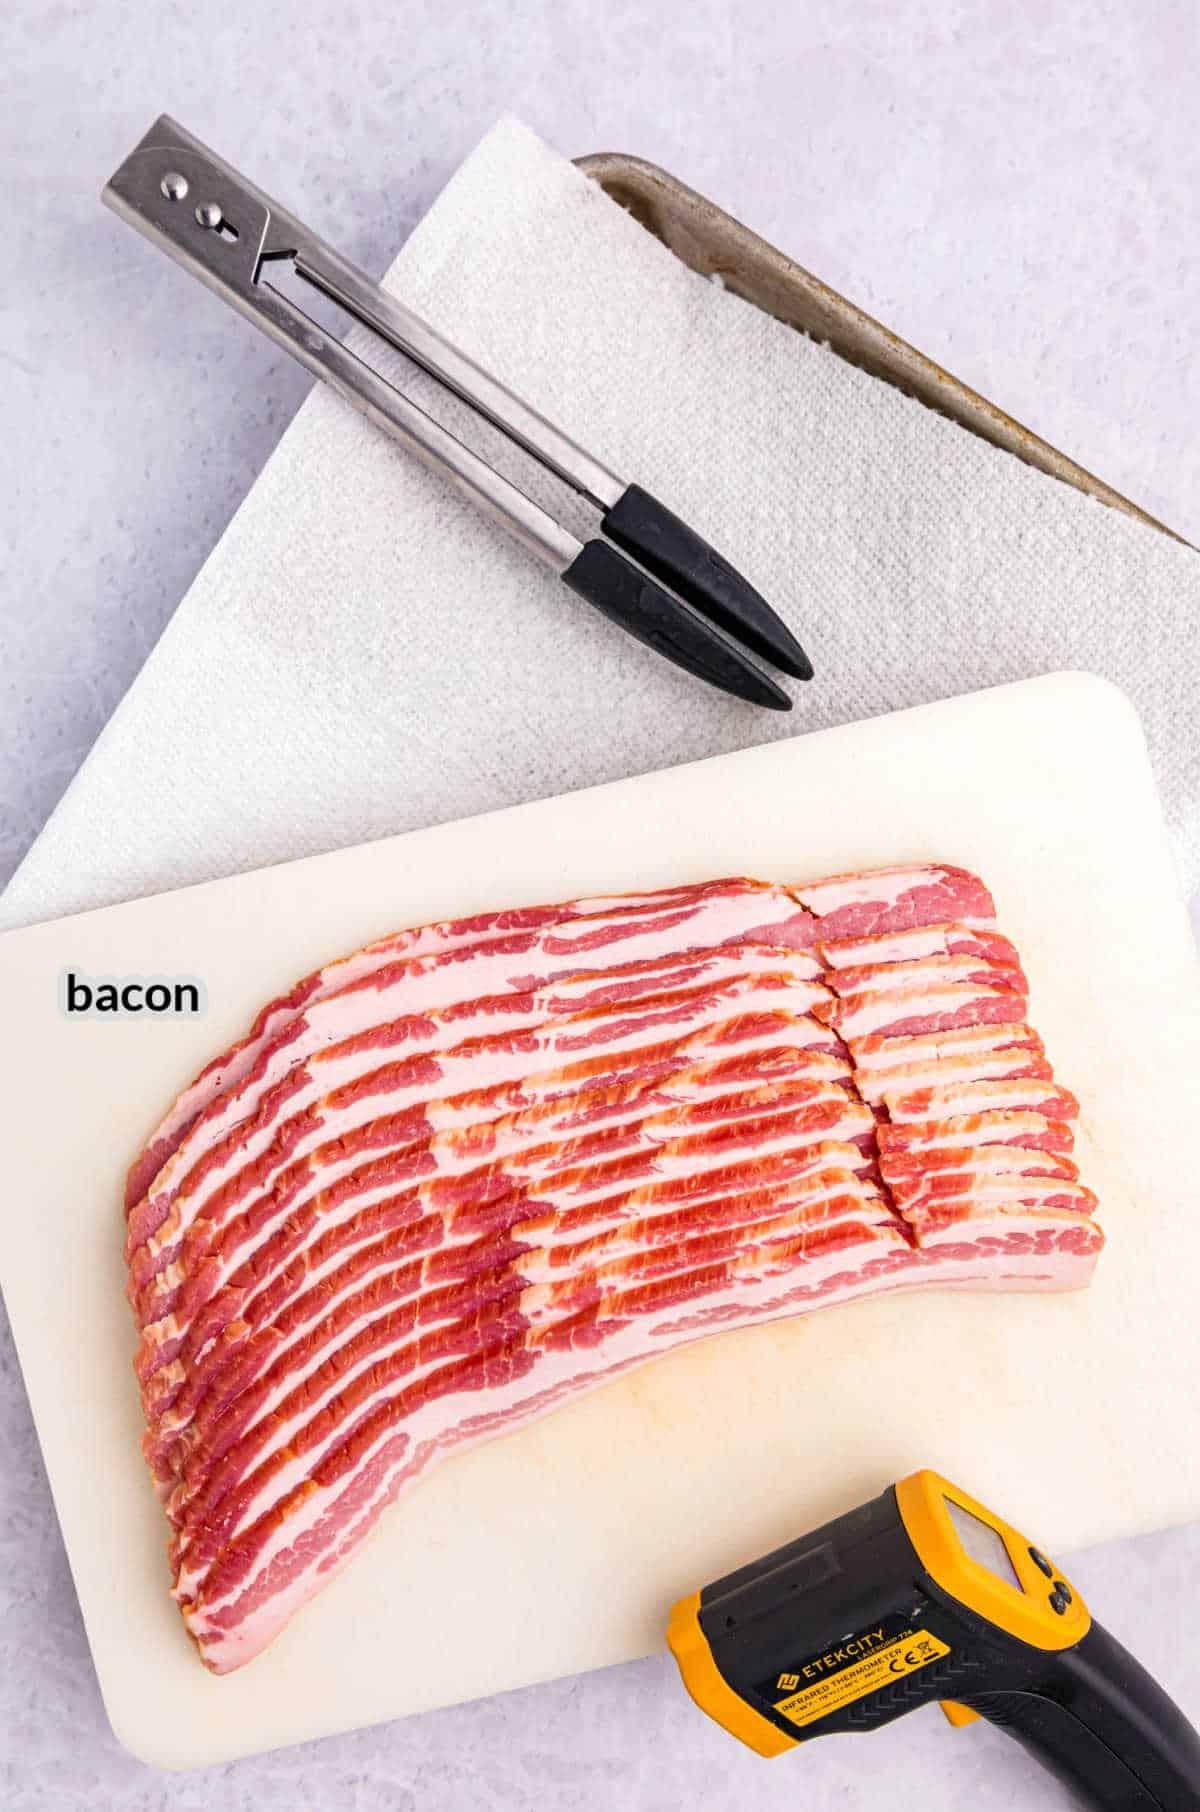 Overhead Image of Blackstone Bacon Ingredients and Griddle Tools